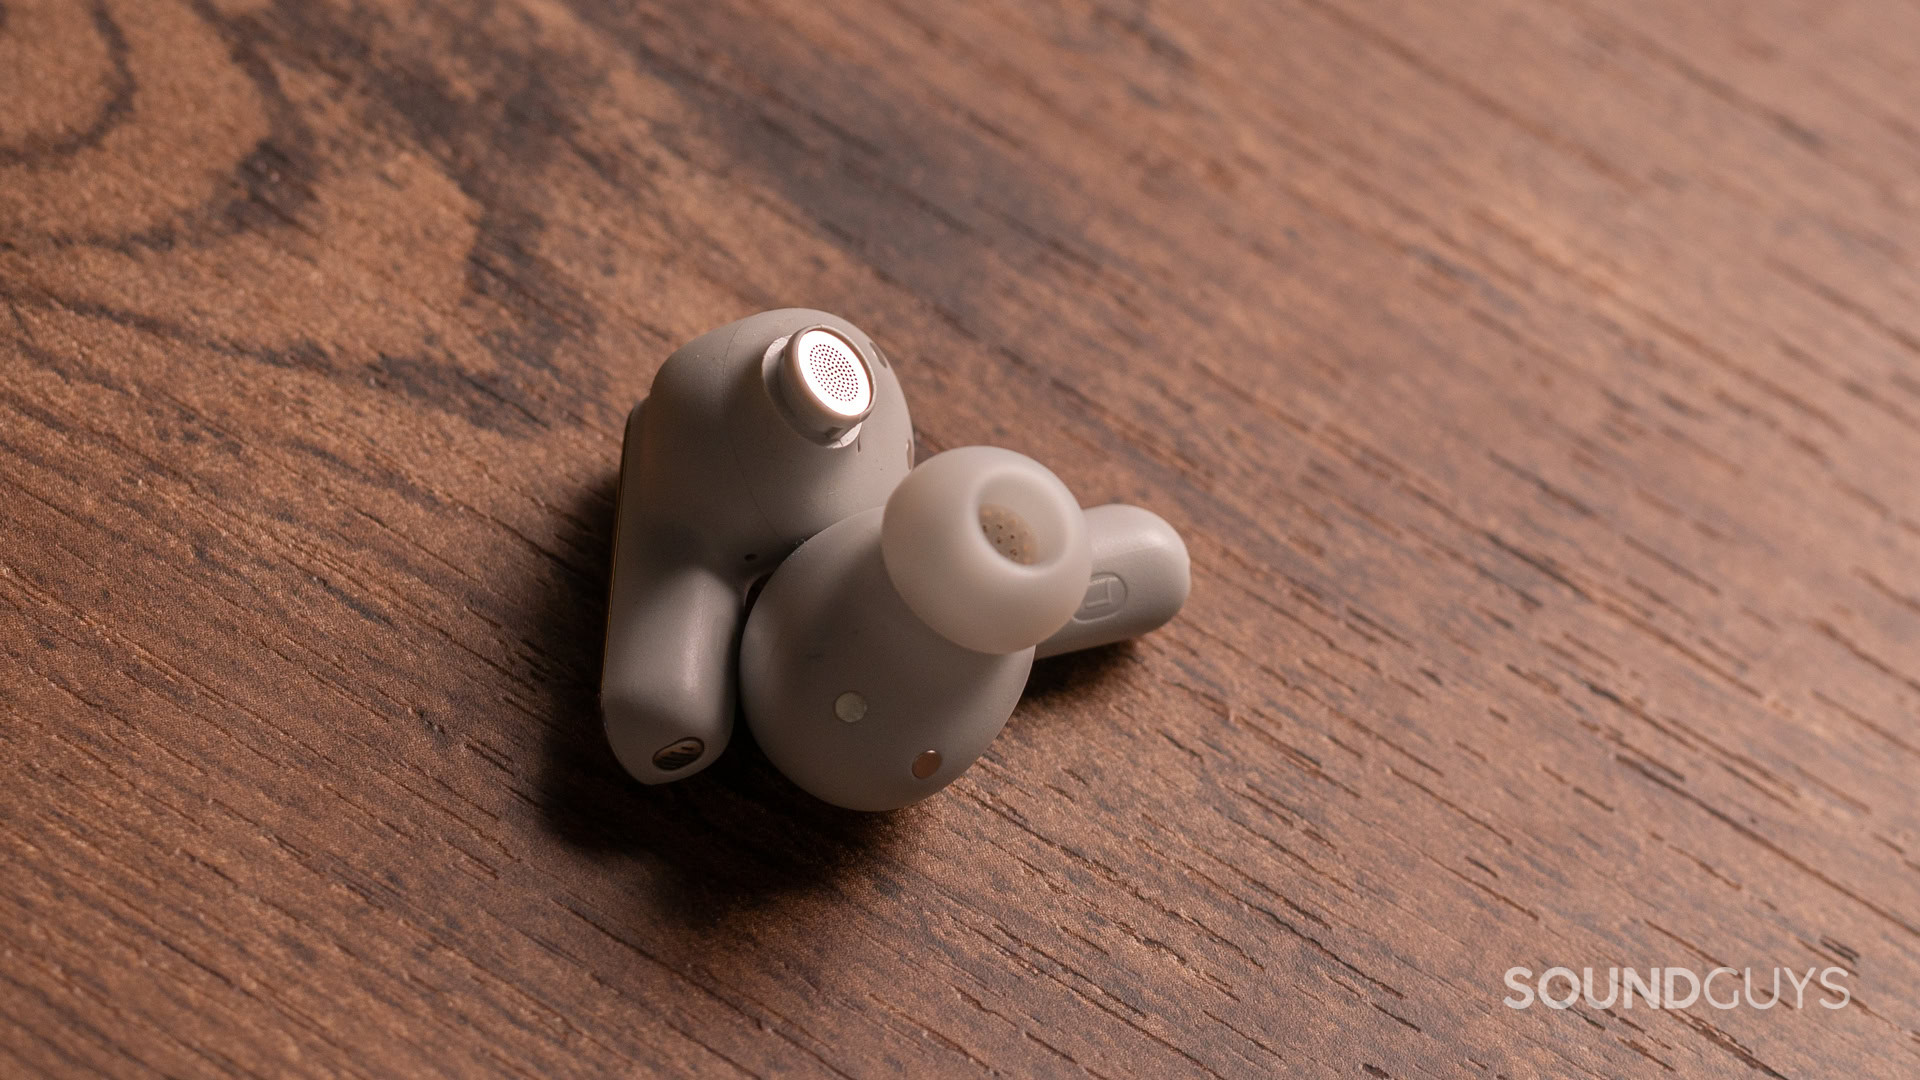 A photo of the JBL Live Beam 3's earbud nozzles.